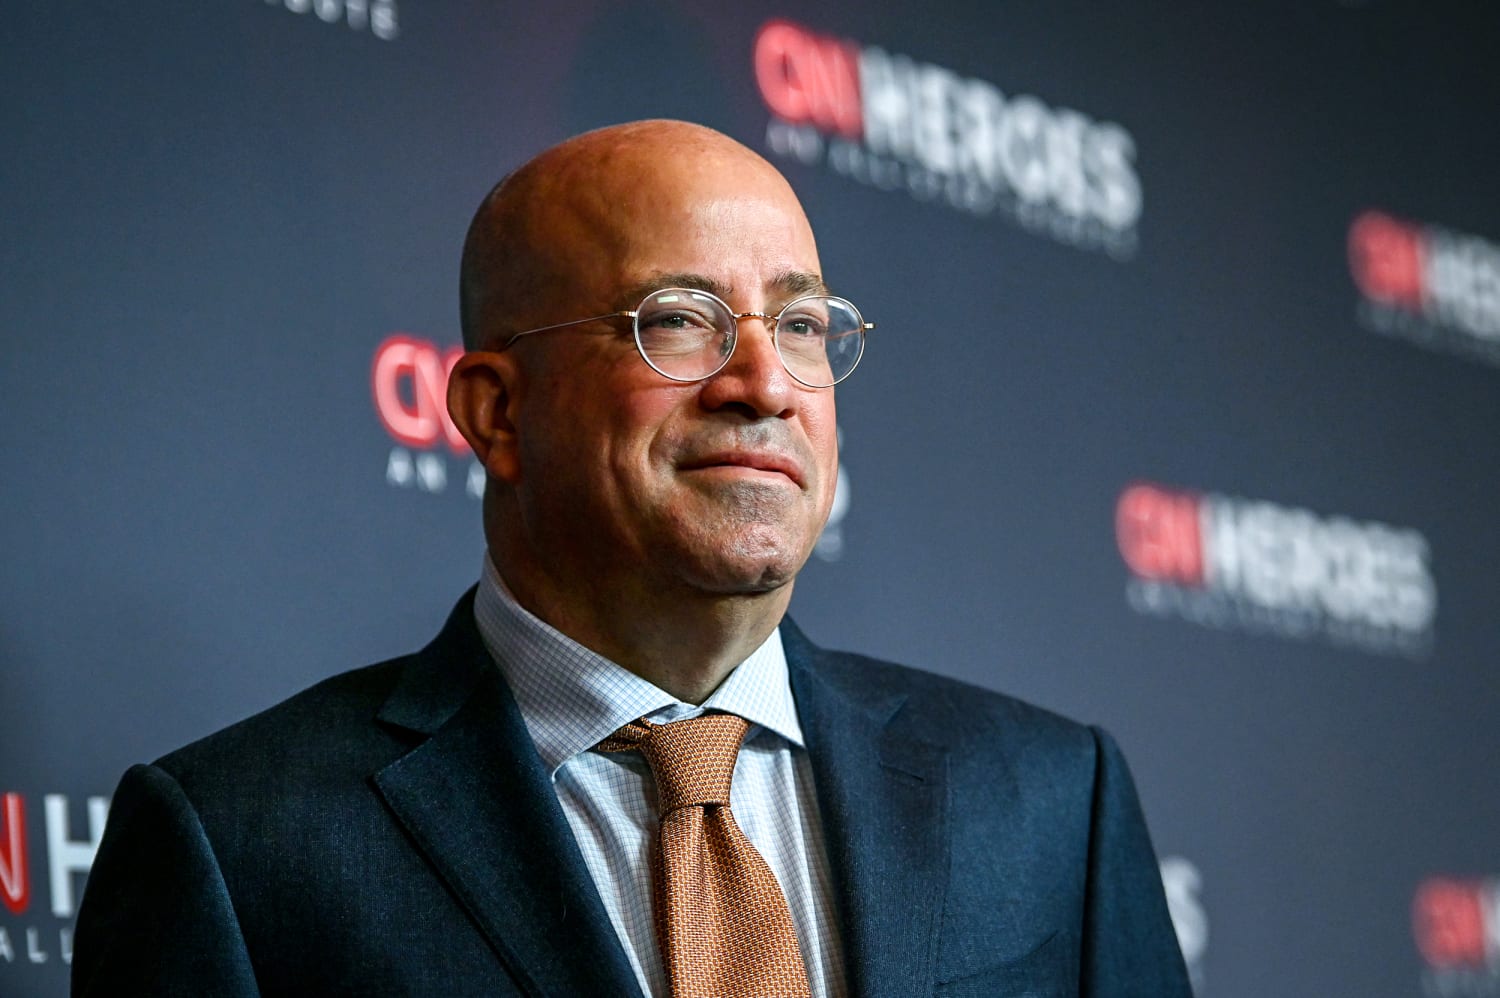 CNN president Jeff Zucker resigns, after failing to disclose relationship  with colleague